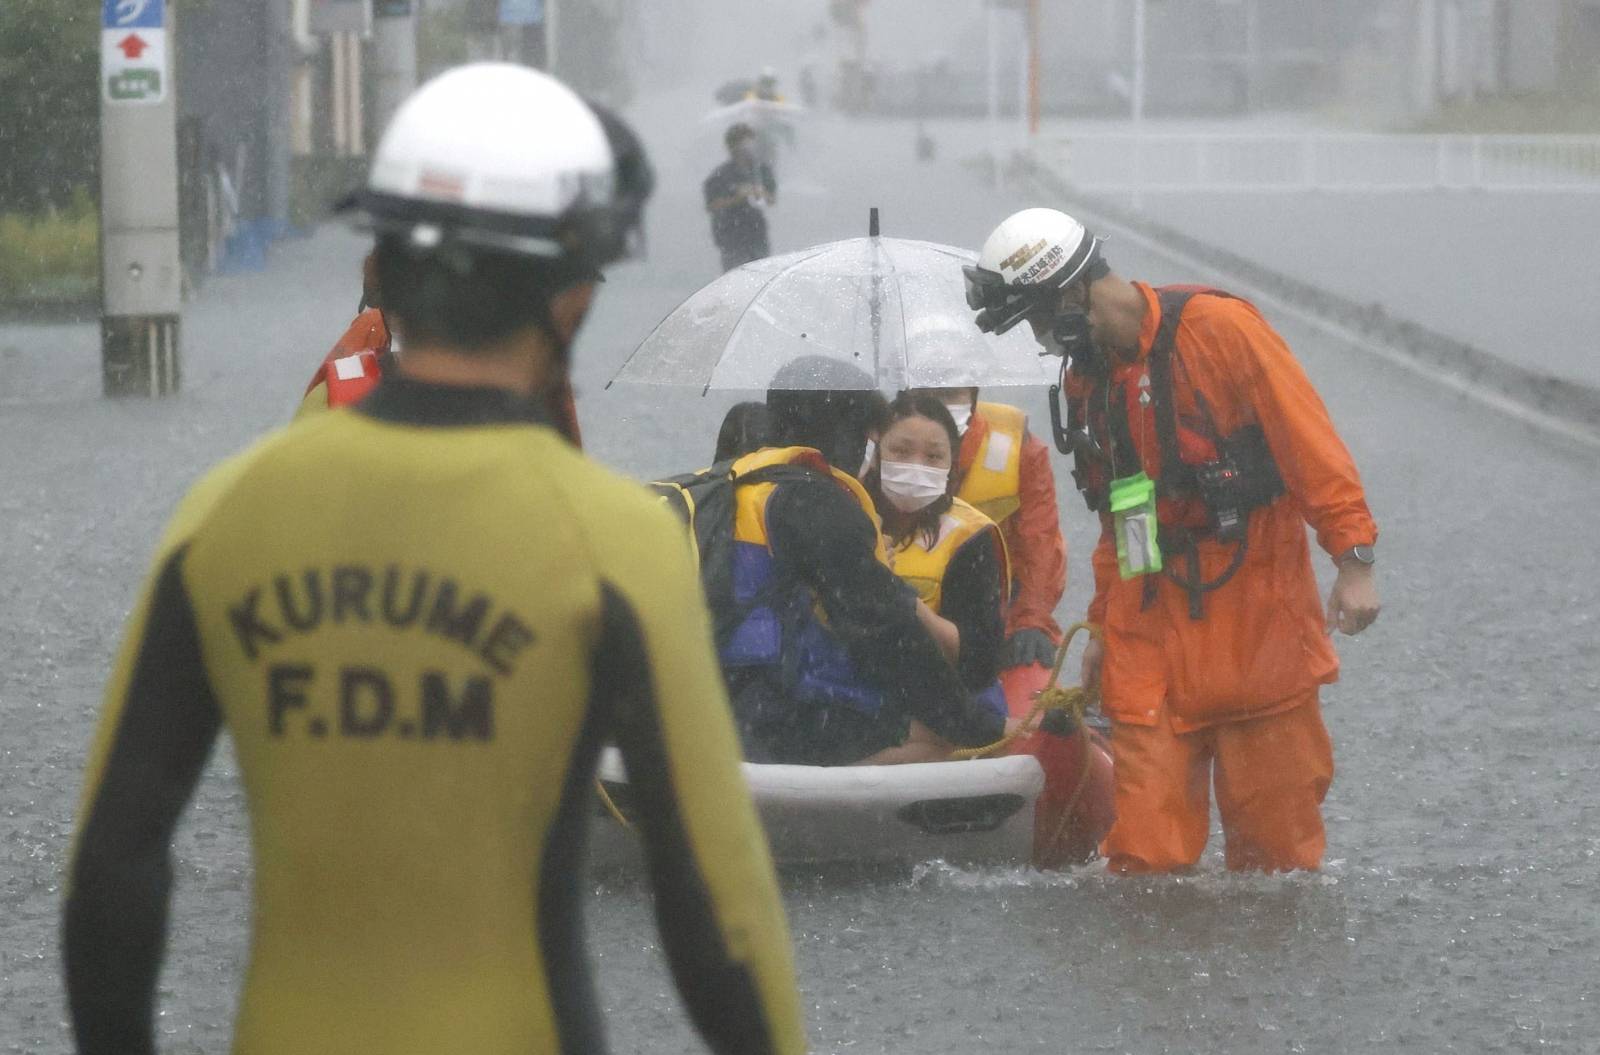 Firefighters transport stranded residents on a boat in a road flooded by heavy rain in Kurume, Japan